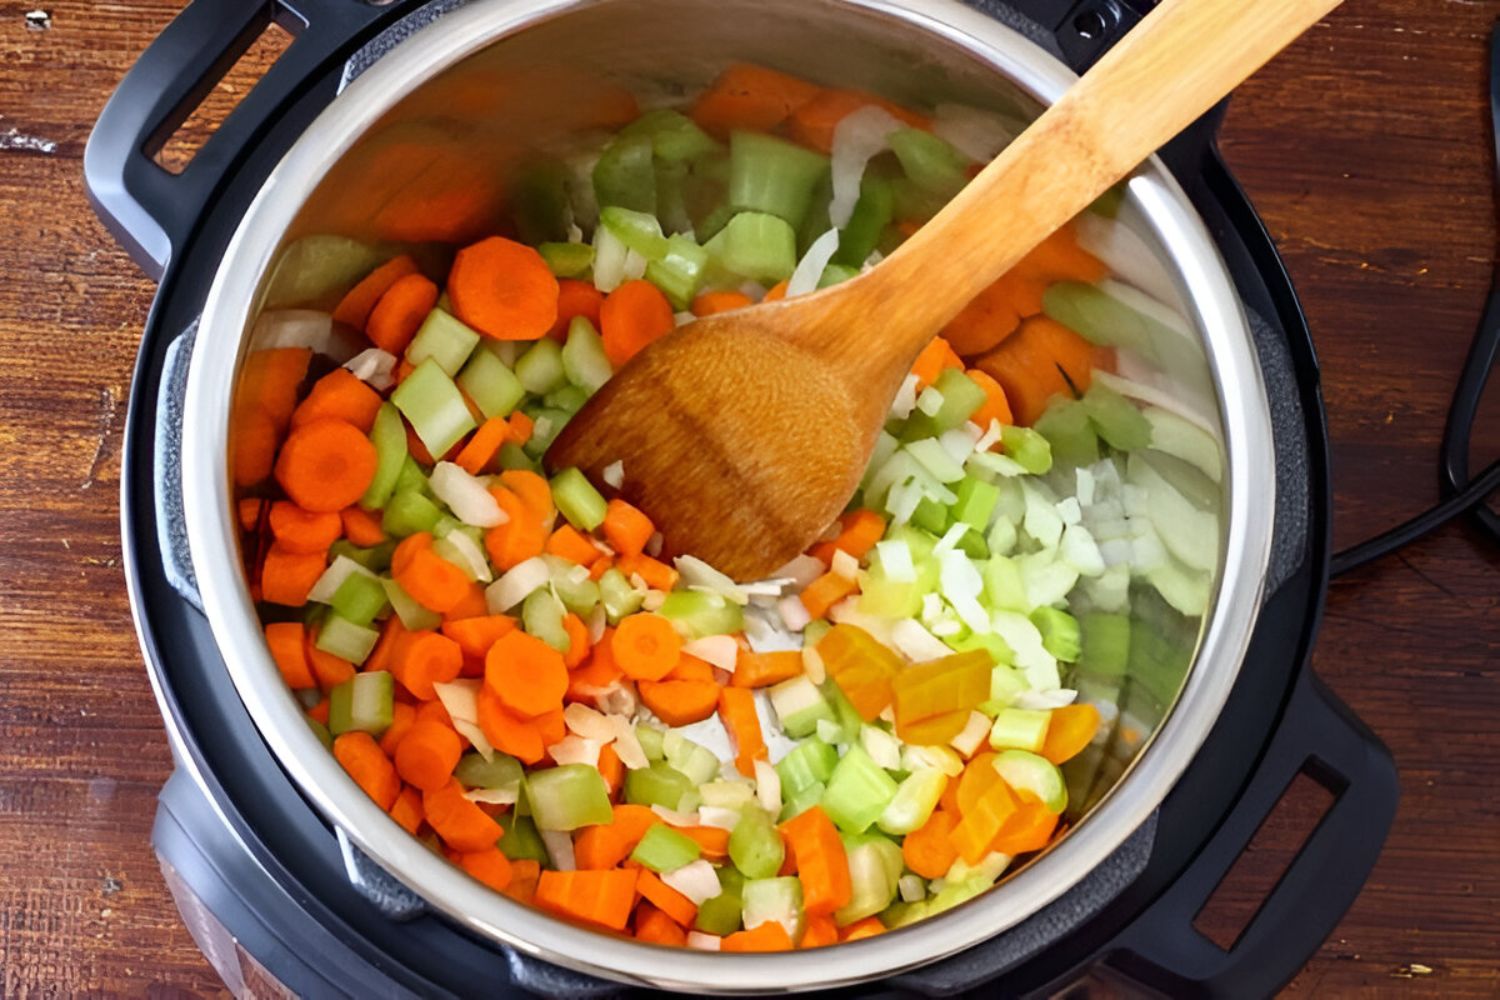 How To Make Frozen Vegetables In An Electric Pressure Cooker